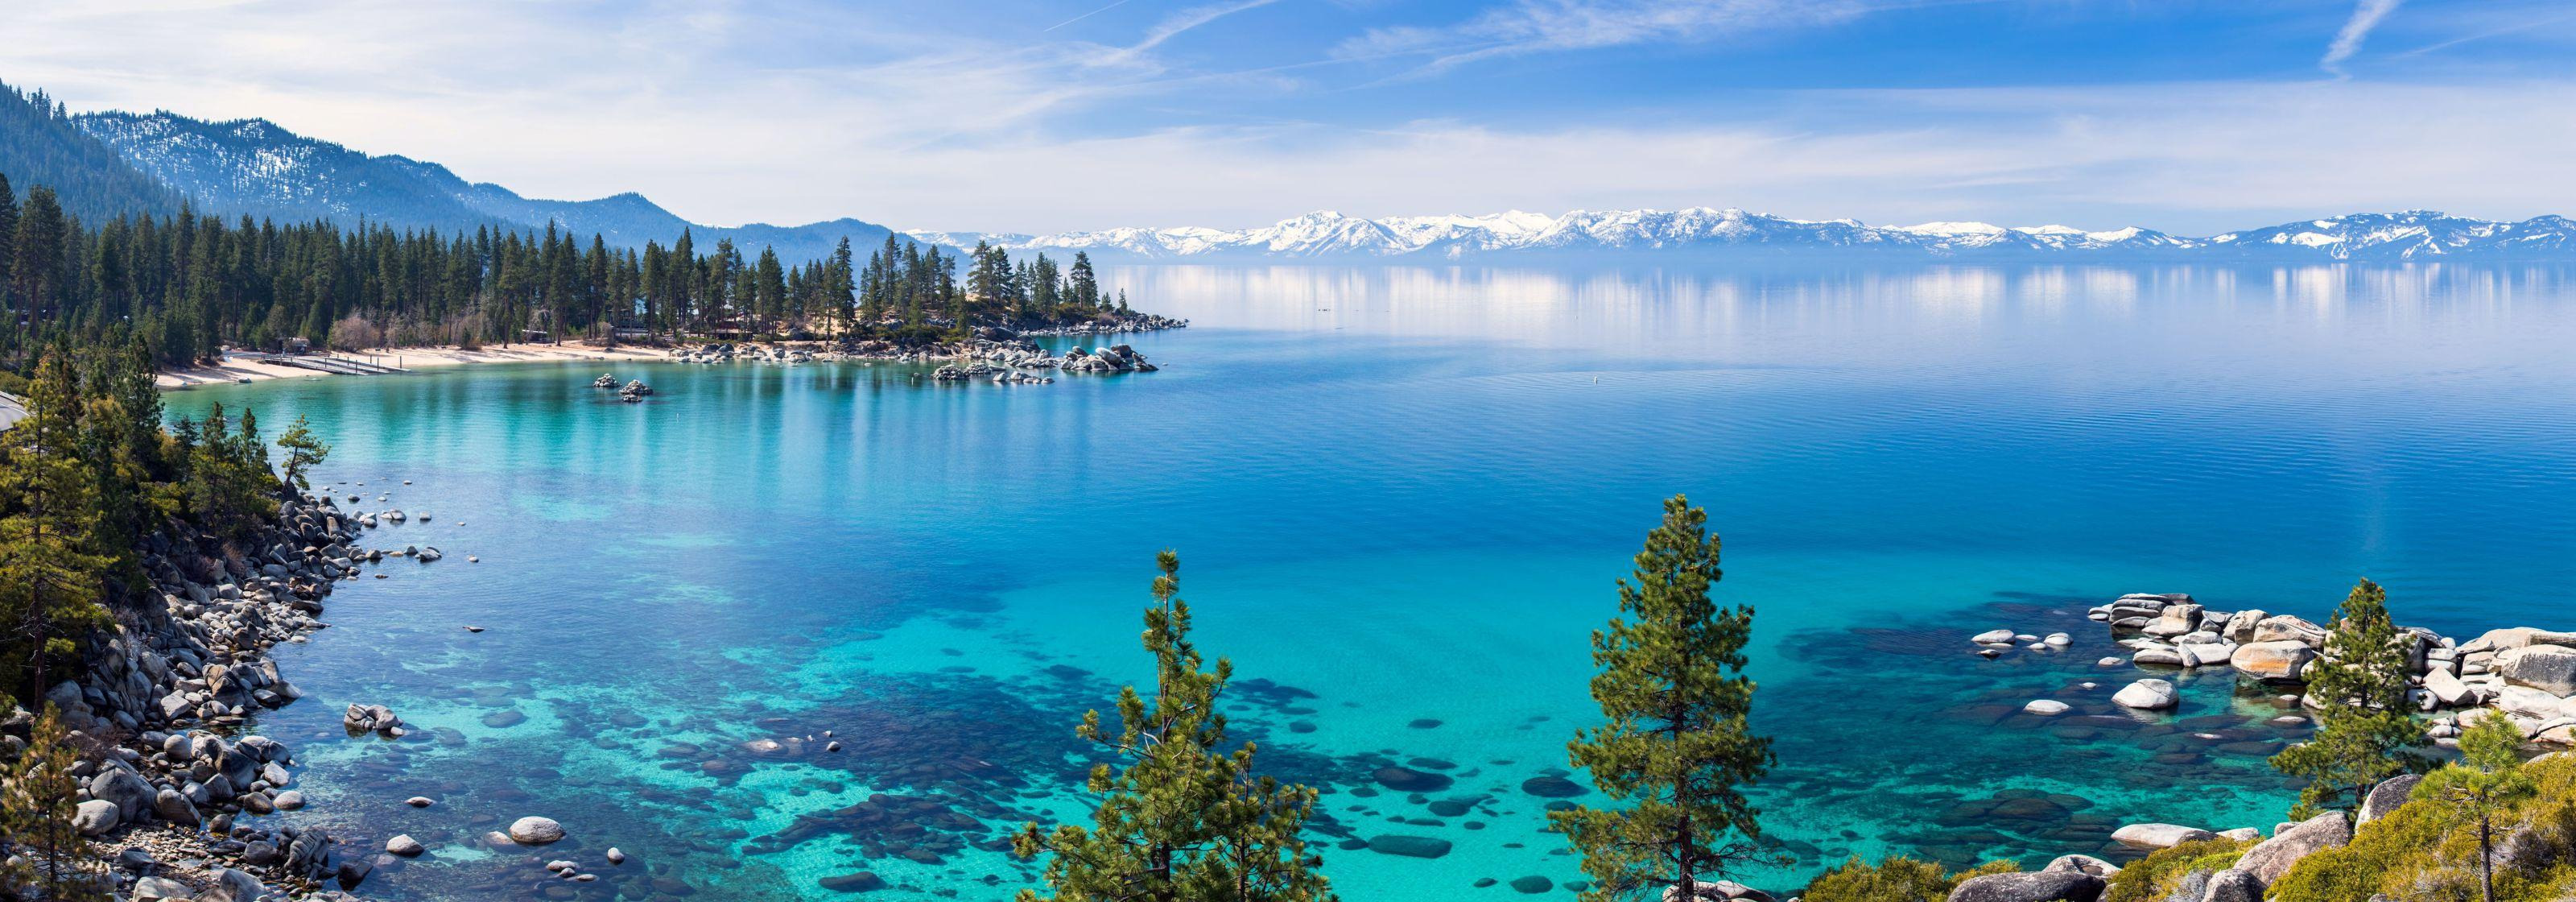 Breathtaking view of Lake Tahoe\'s crystal clear water with surrounding mountains